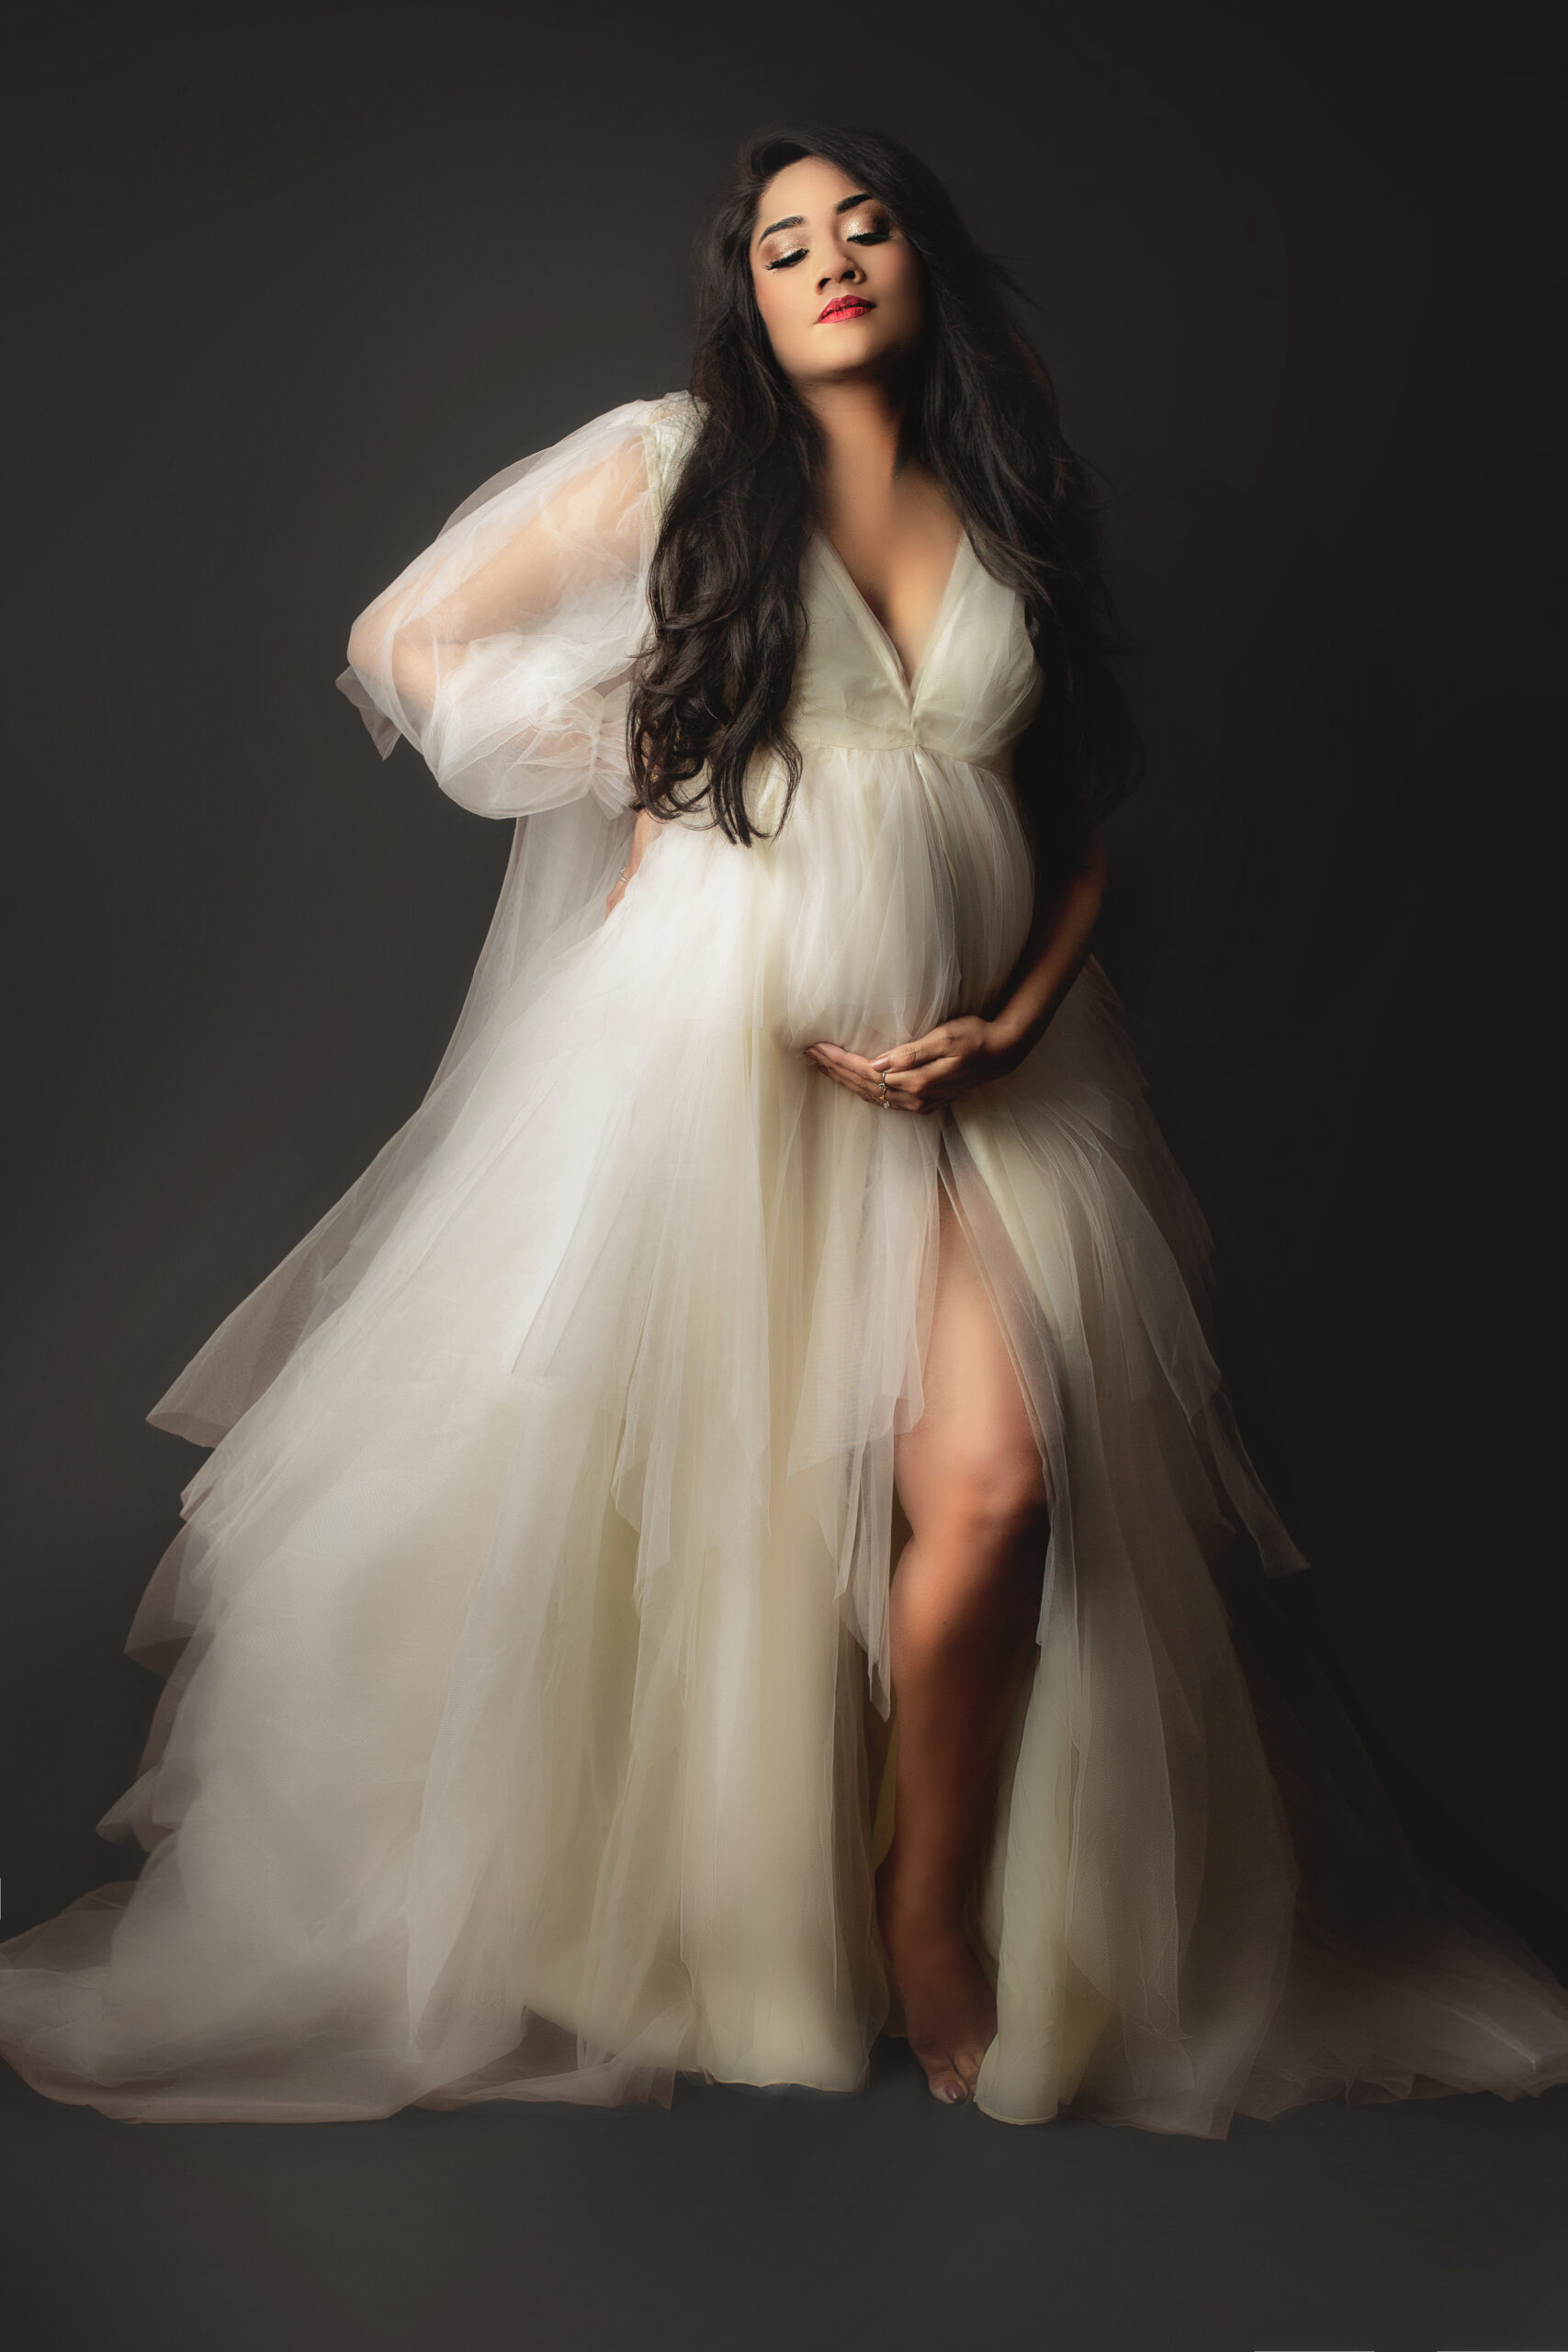 mother poses at burlington maternity photoshoot wearing white couture gown